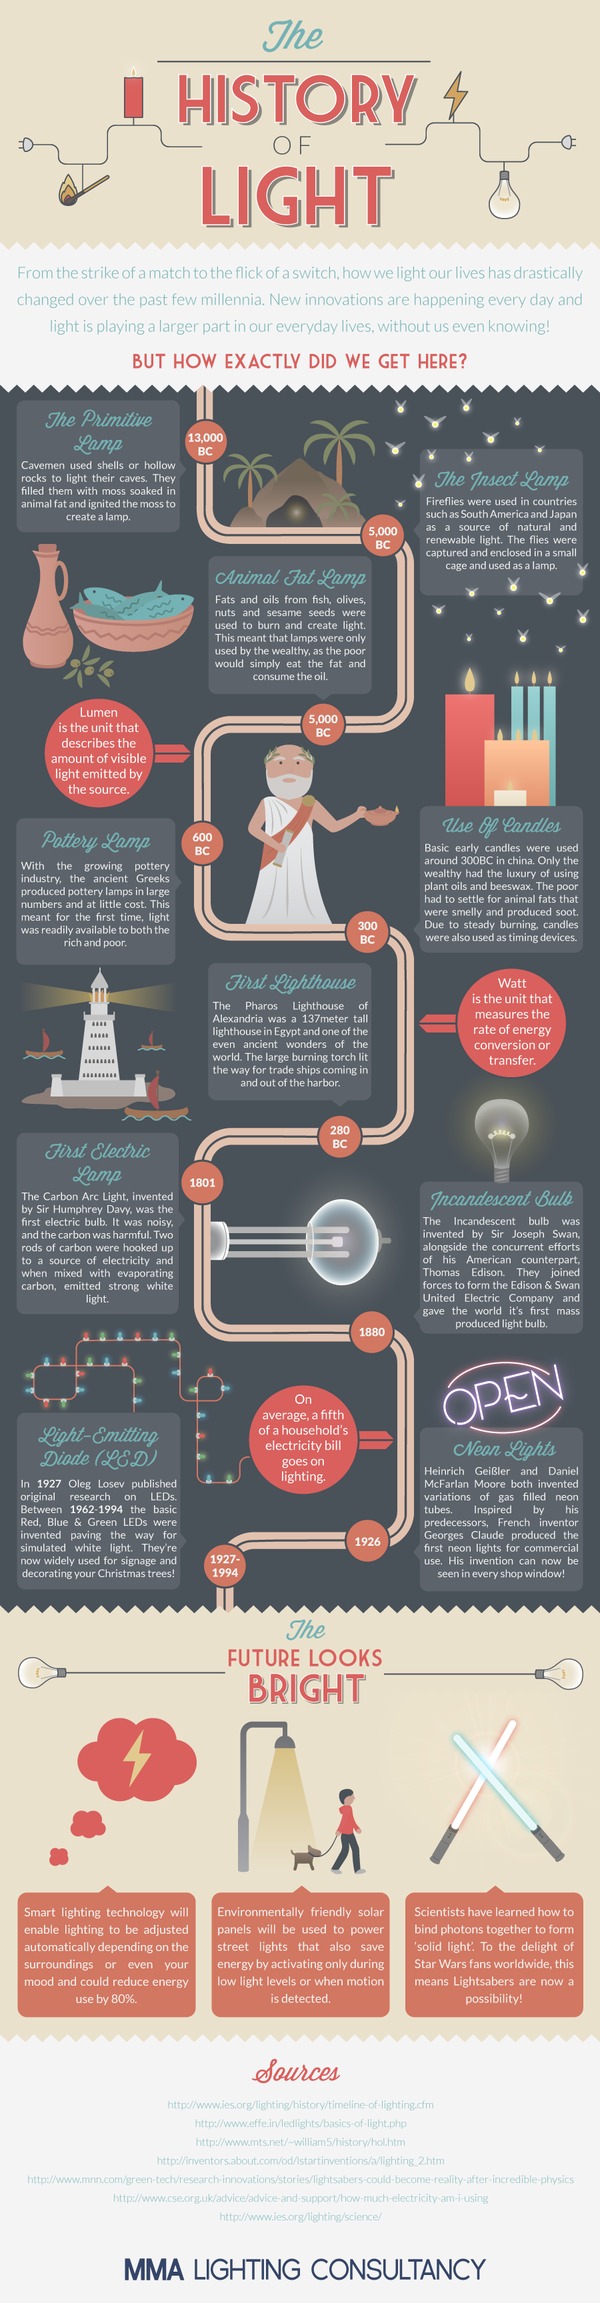 The History of Light